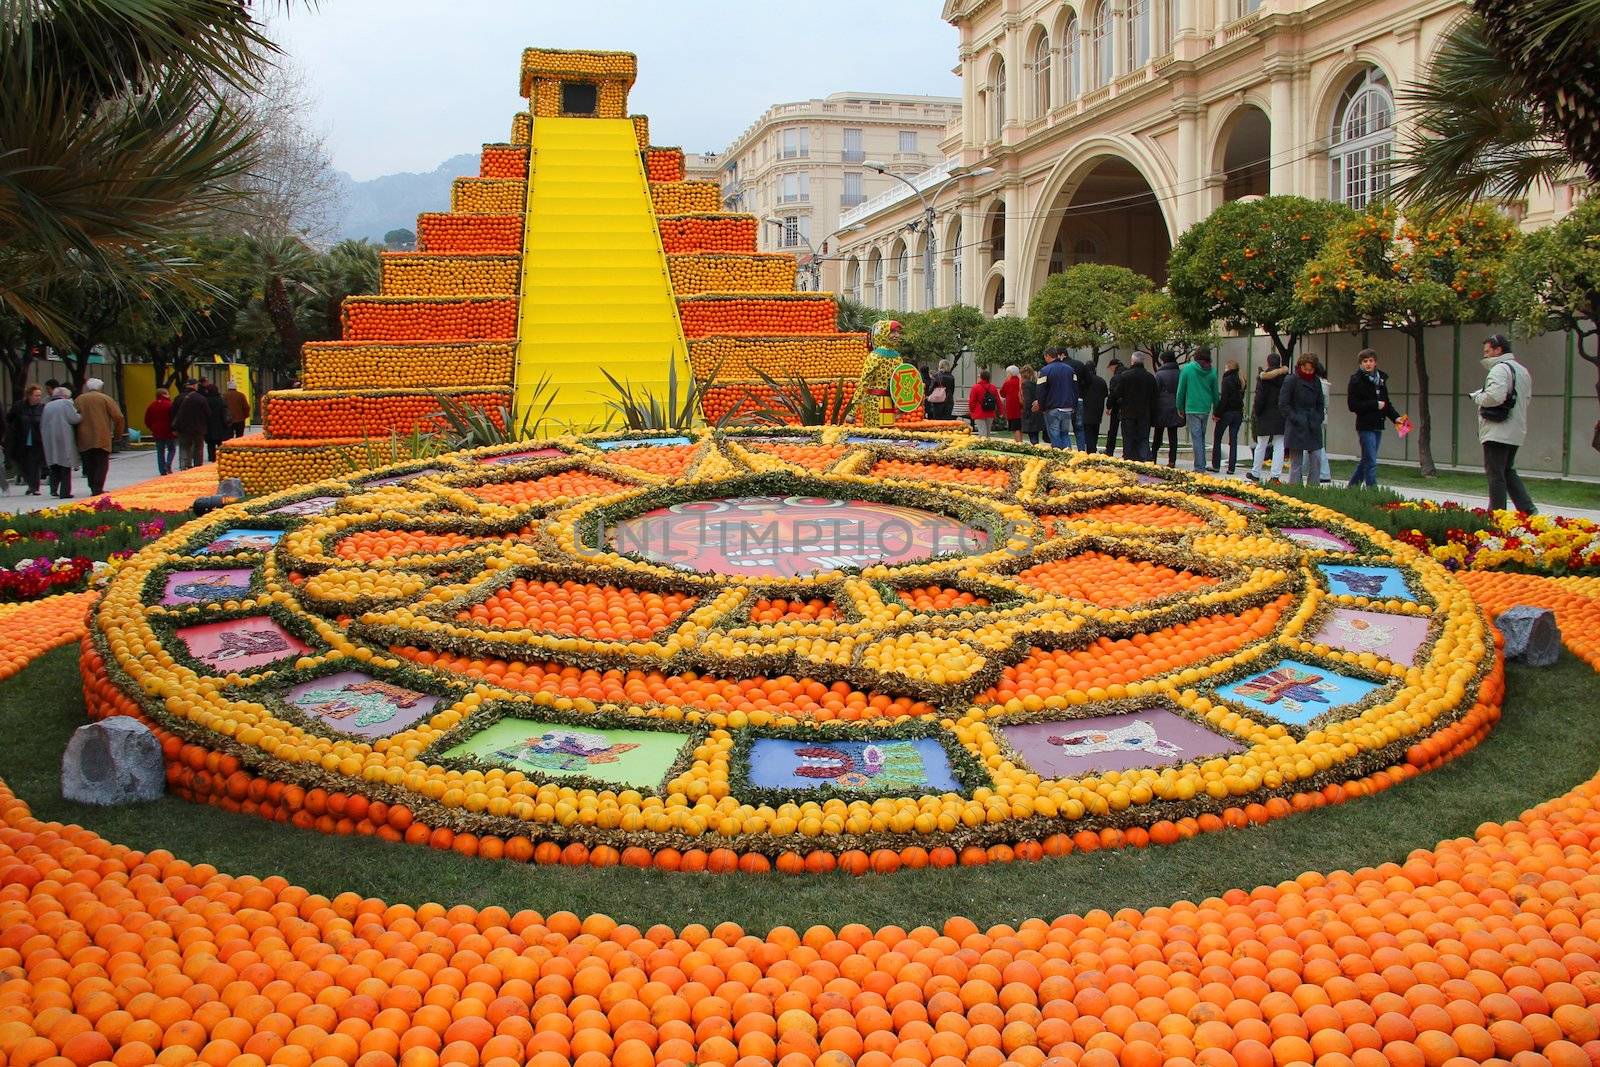 The famous fruit garden receives 230,000 visitors a year







Art made of lemons and oranges in the famous Lemon Festival